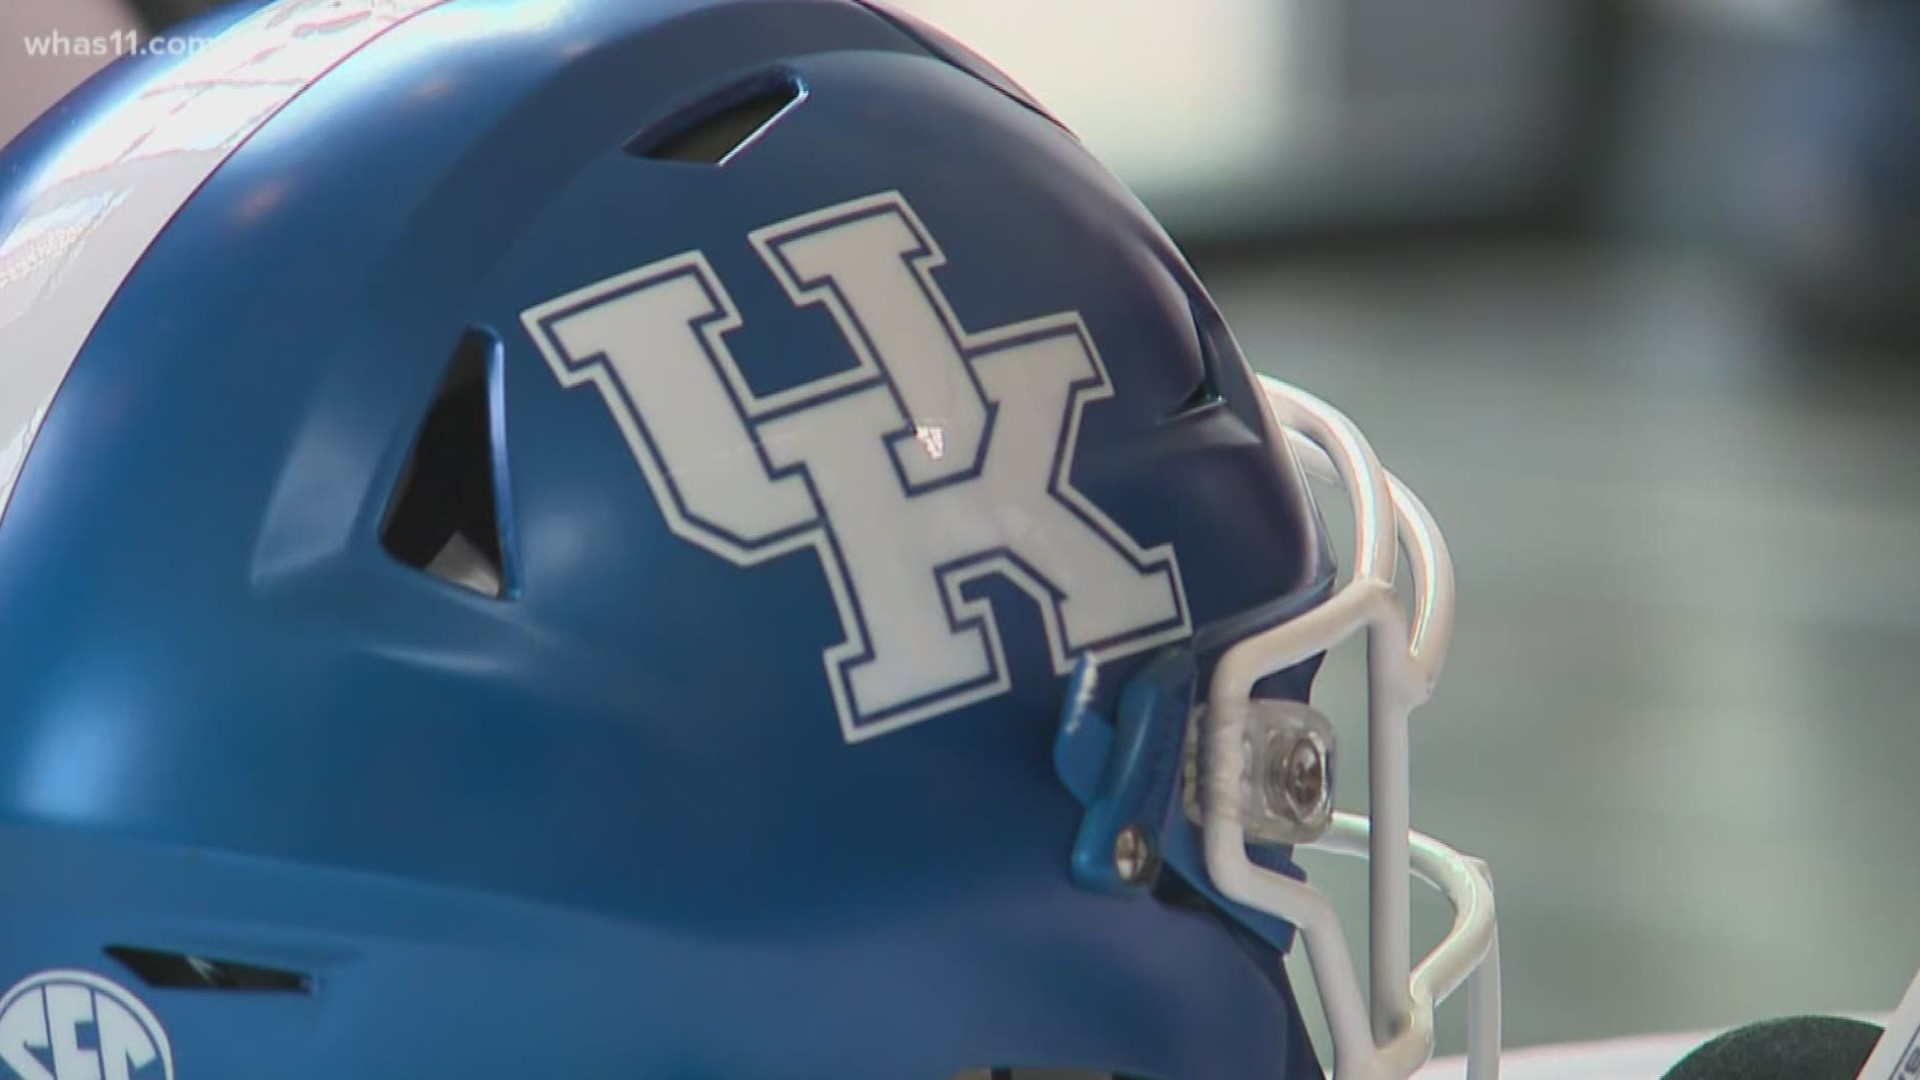 Six University of Kentucky football players accused of burglary, stemming from a March incident will not be indicted.